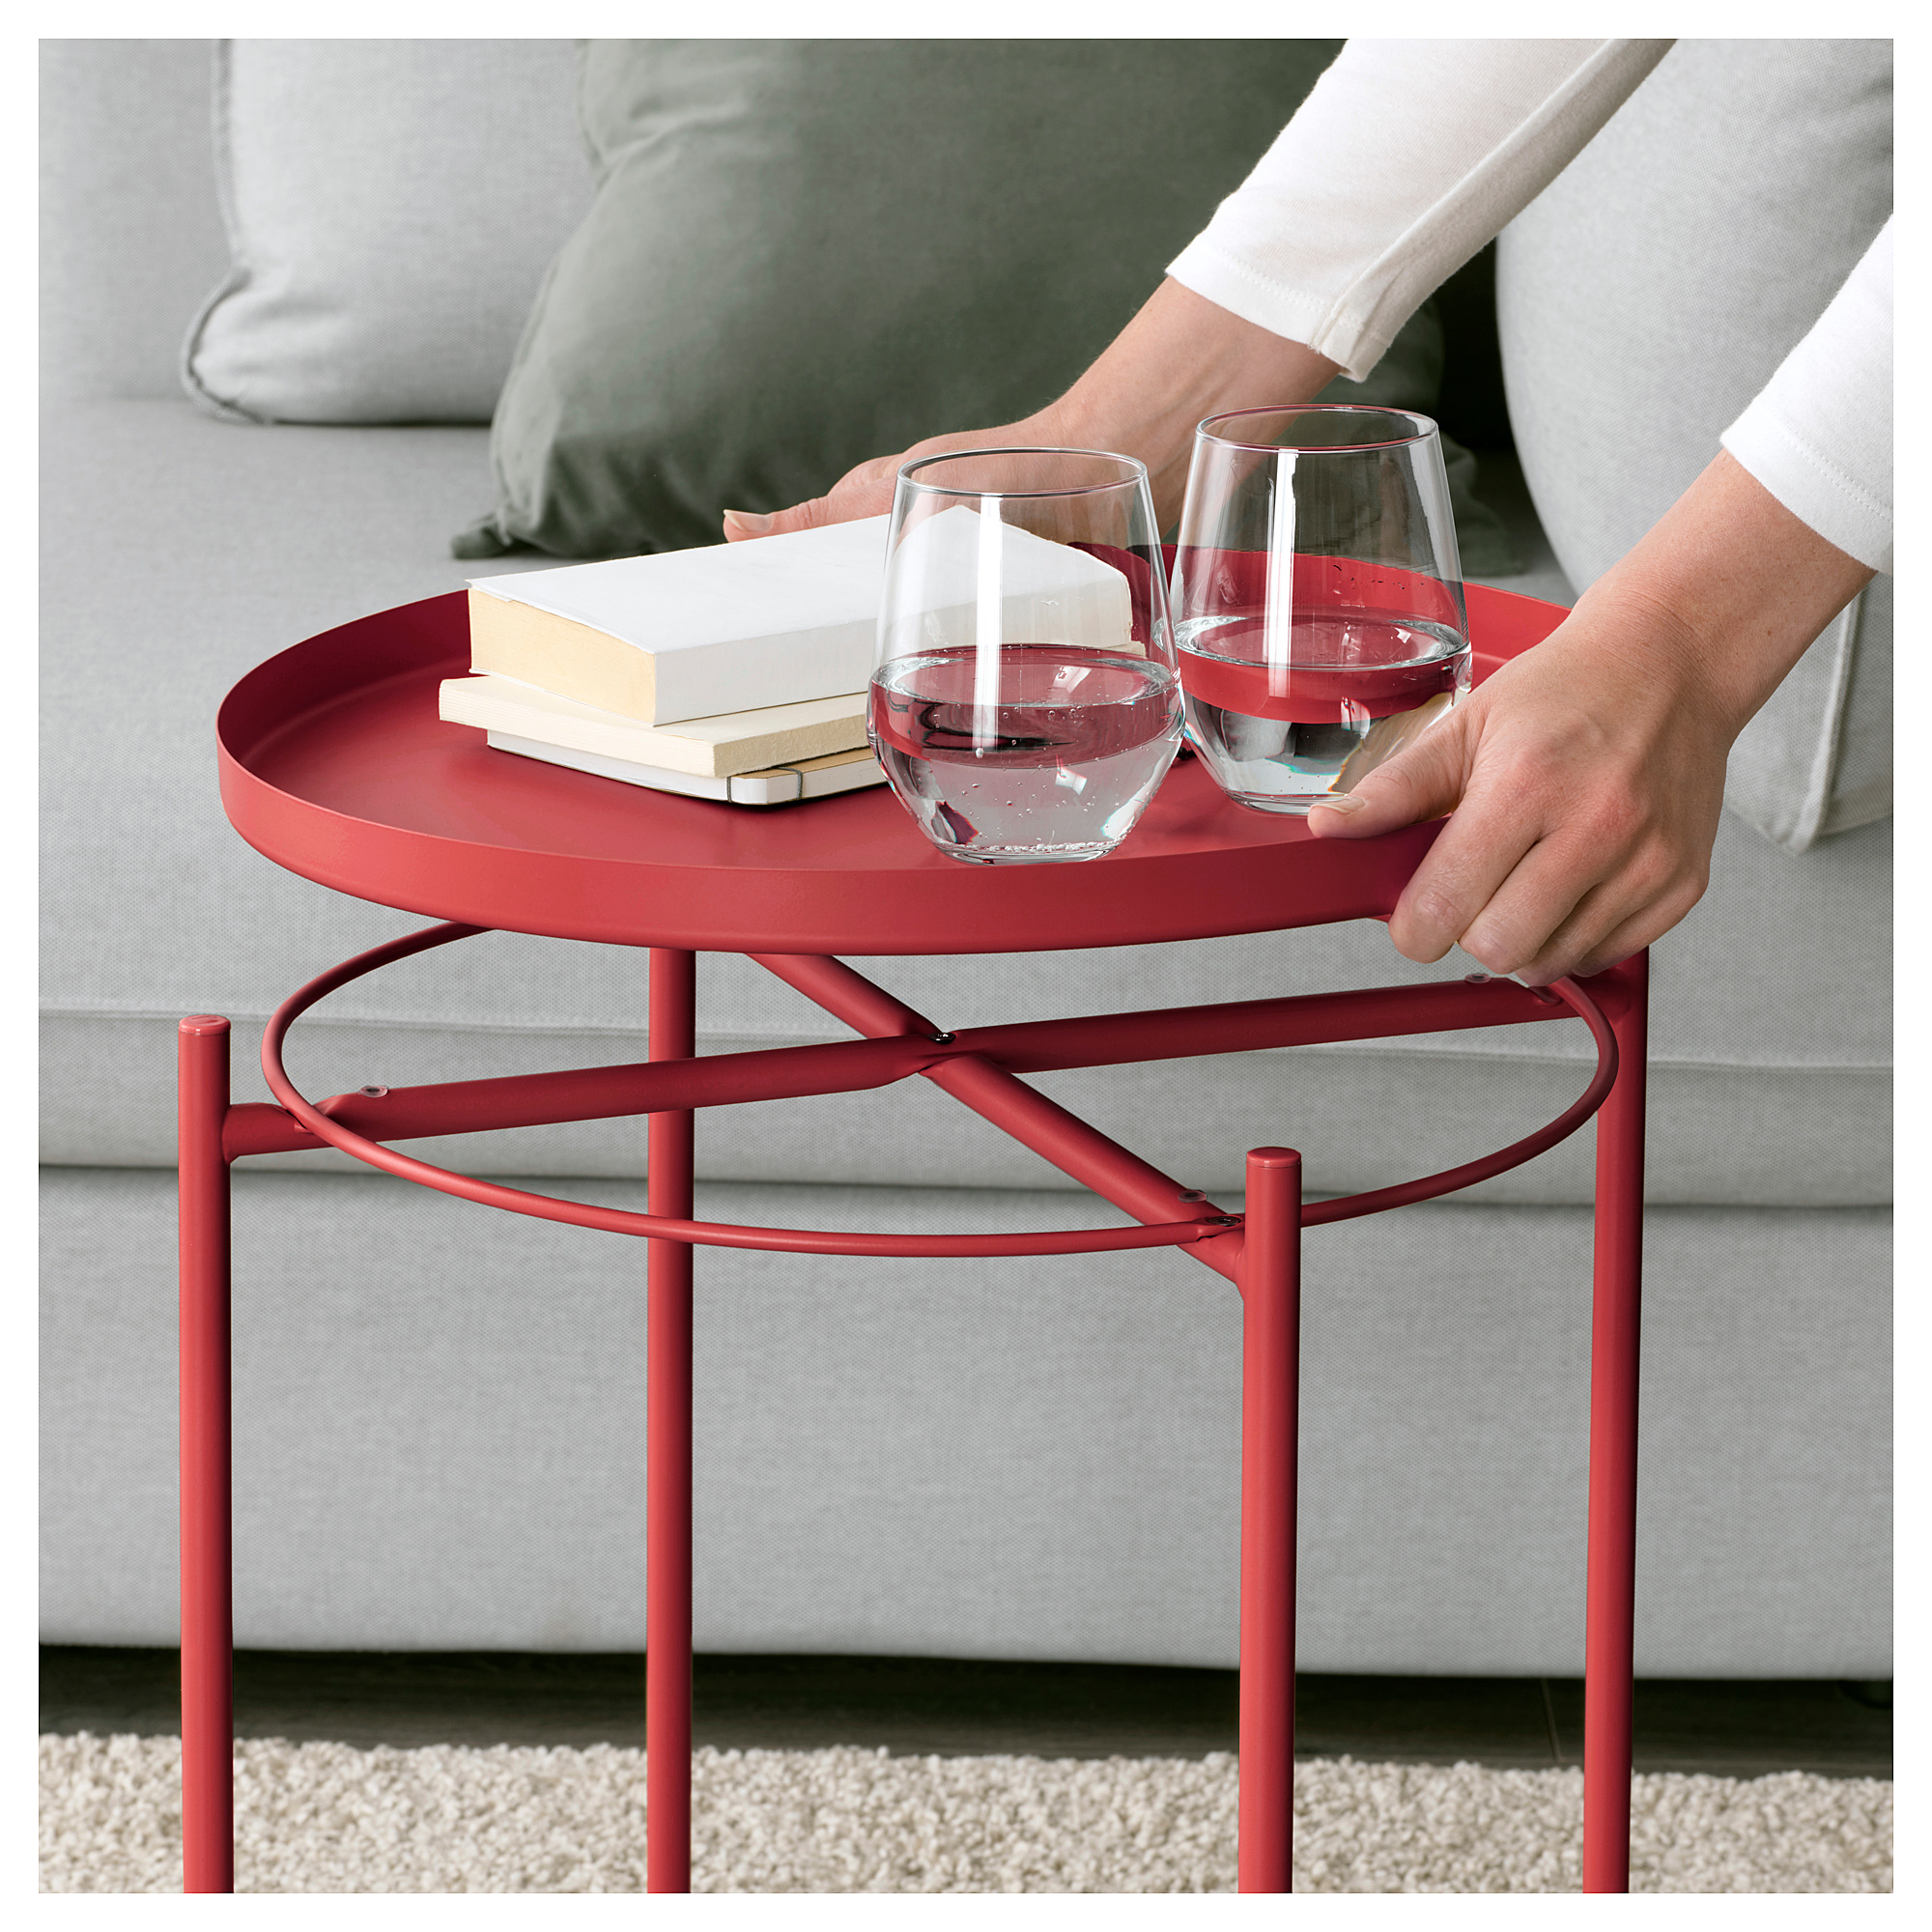 <h2><a href="https://www.ikea.com/ca/fr/catalog/products/10411992/" target="_blank" rel="noopener">Table-plateau</a></h2>
<p>GLADOM</p>
<p>24,99 $</p>
